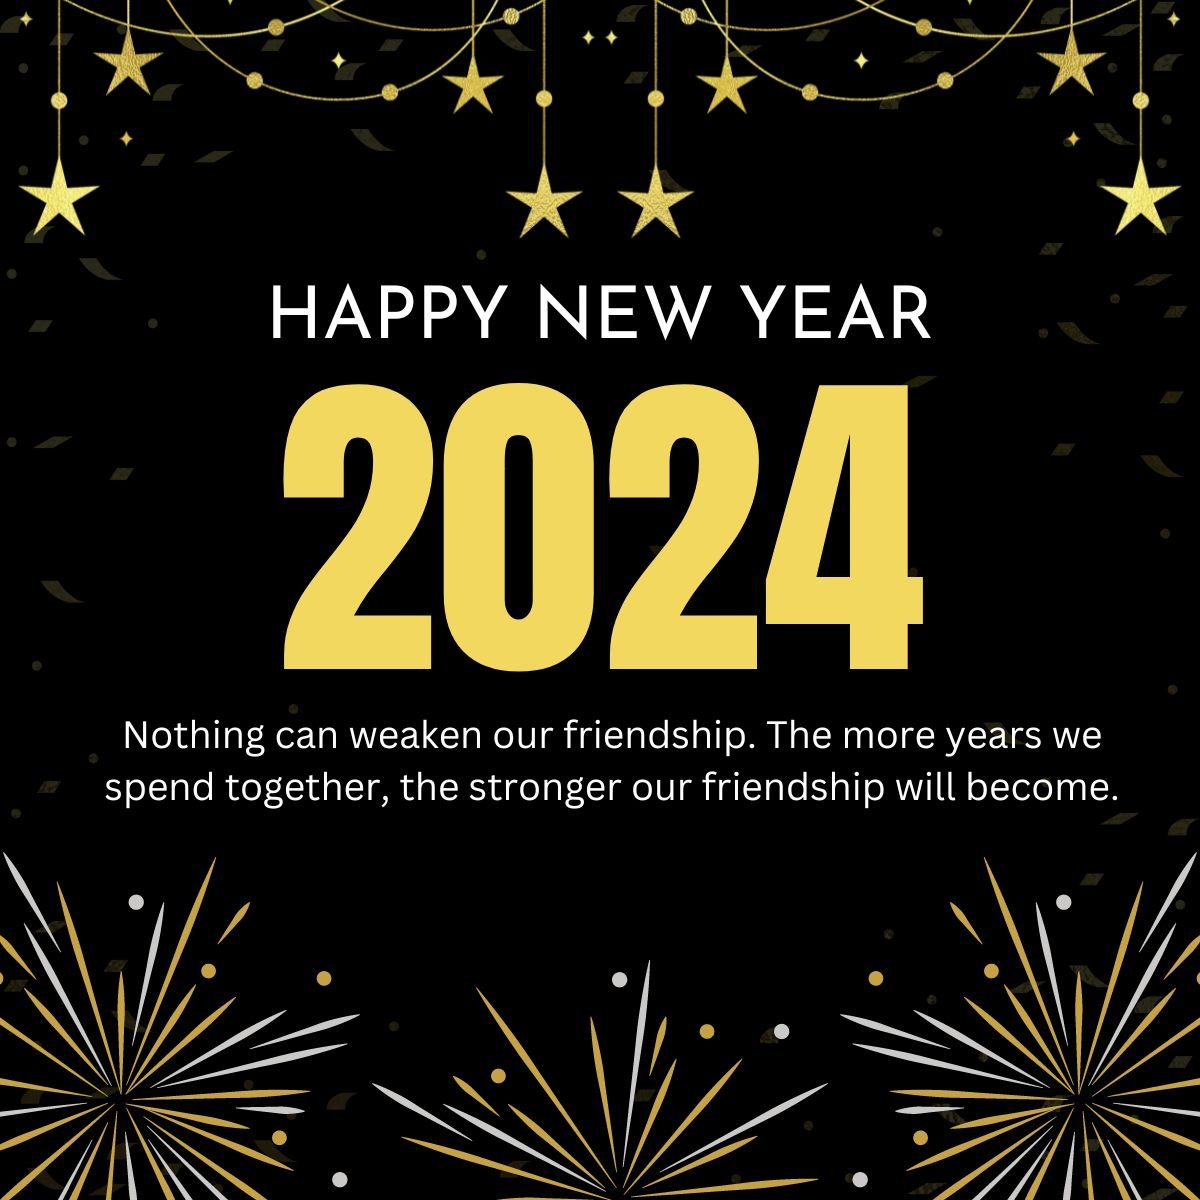 Happy New Year 2024 Wishes Greeting Card About Friendship For Friends Hd